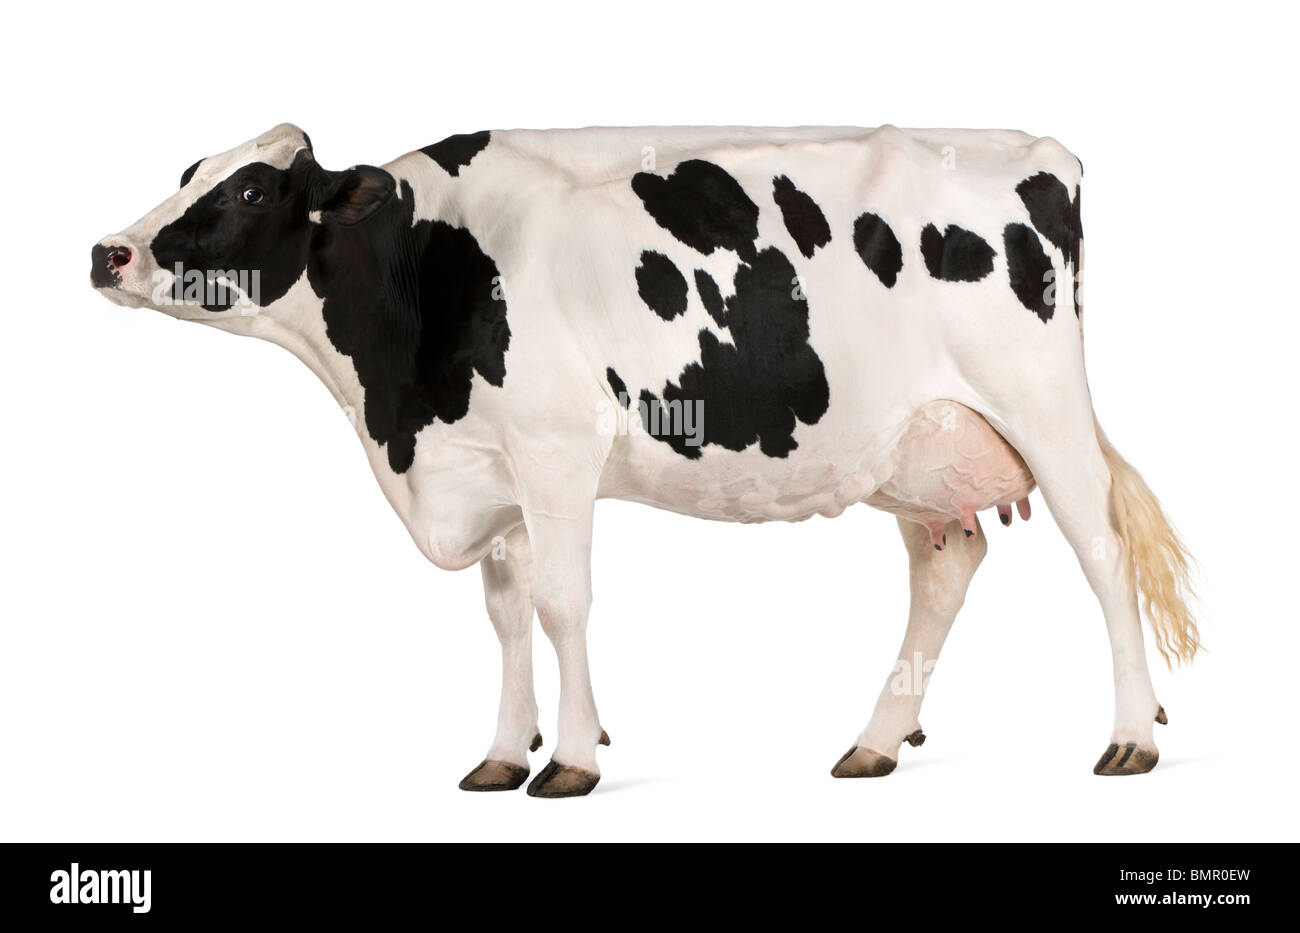 Holstein cow, 5 years old, standing against white background Stock Photo